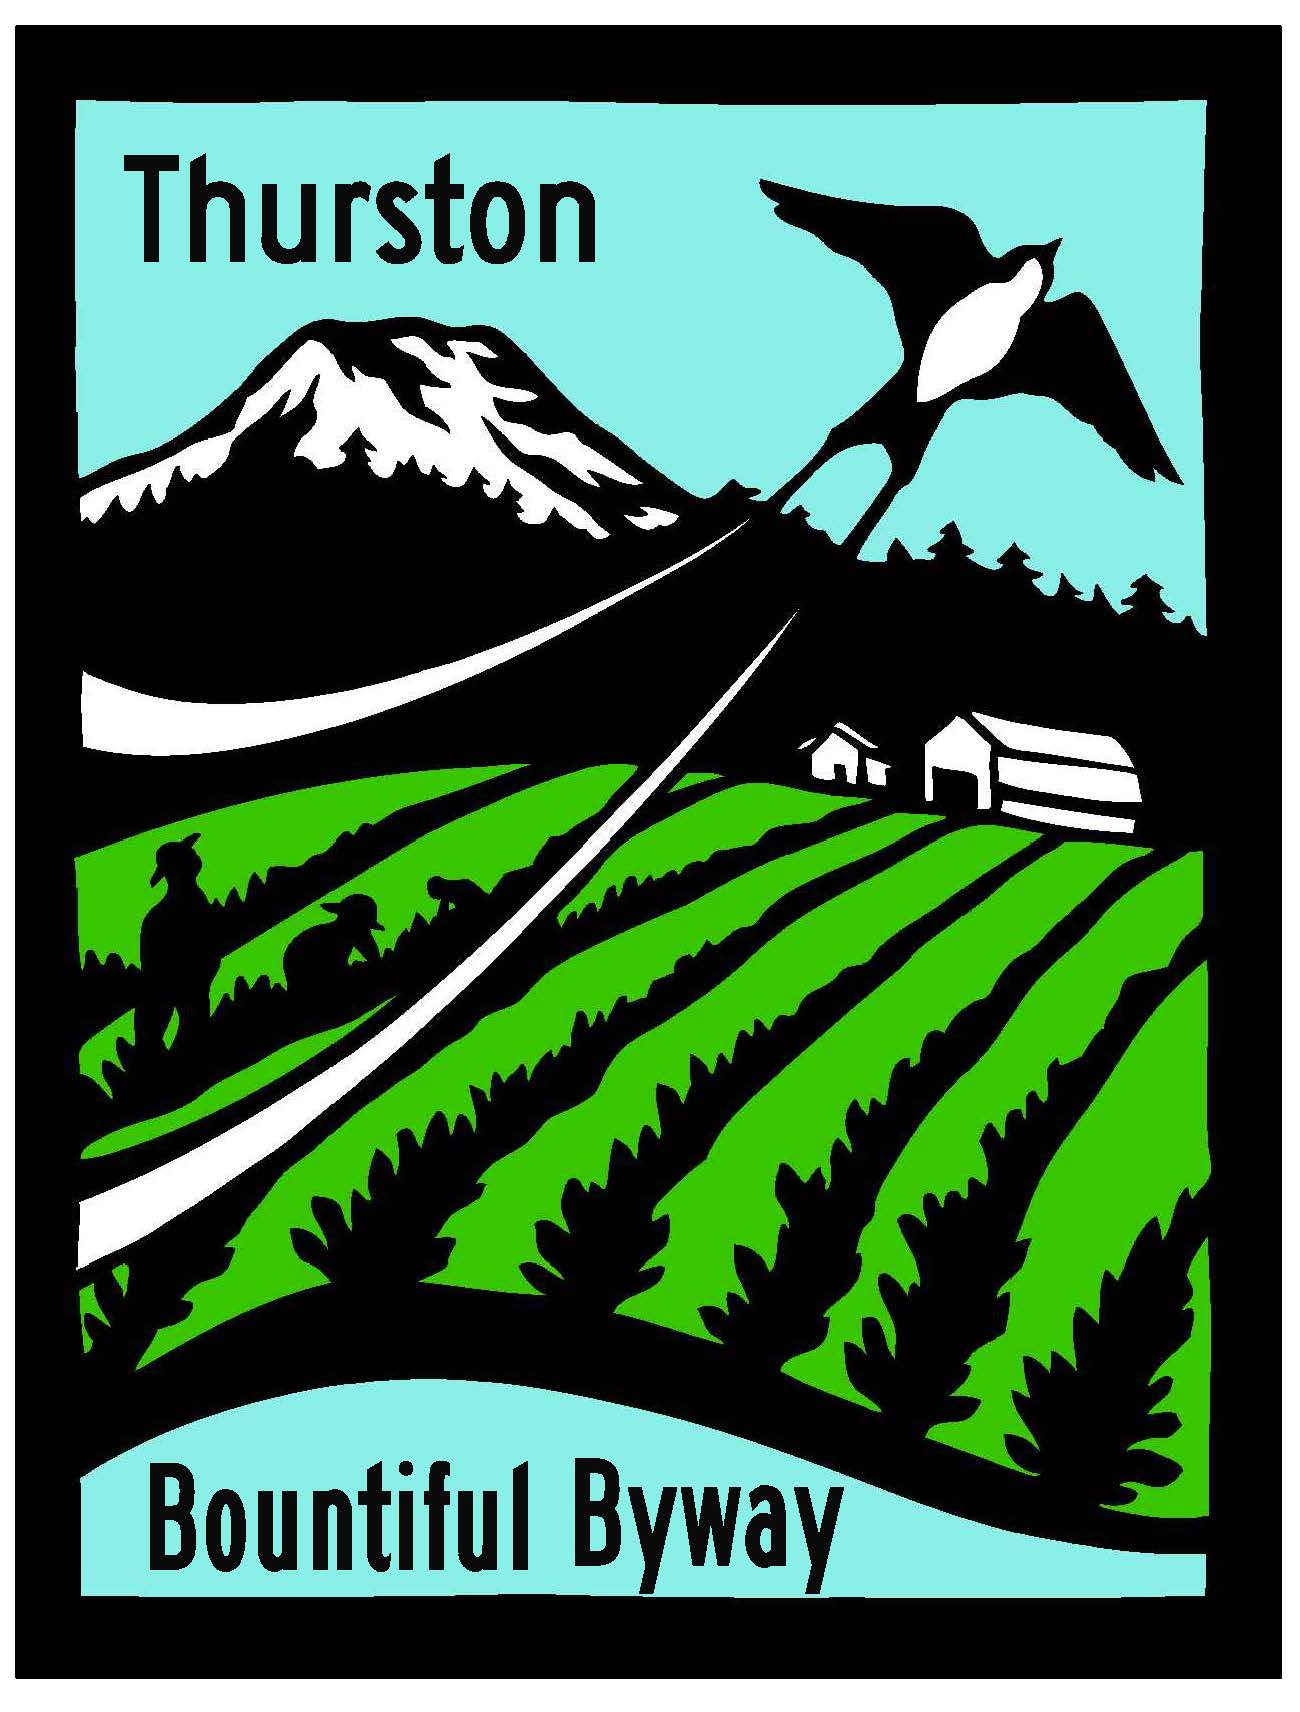 Thurston County Launches Bountiful Byway, Agritourism Route ThurstonTalk